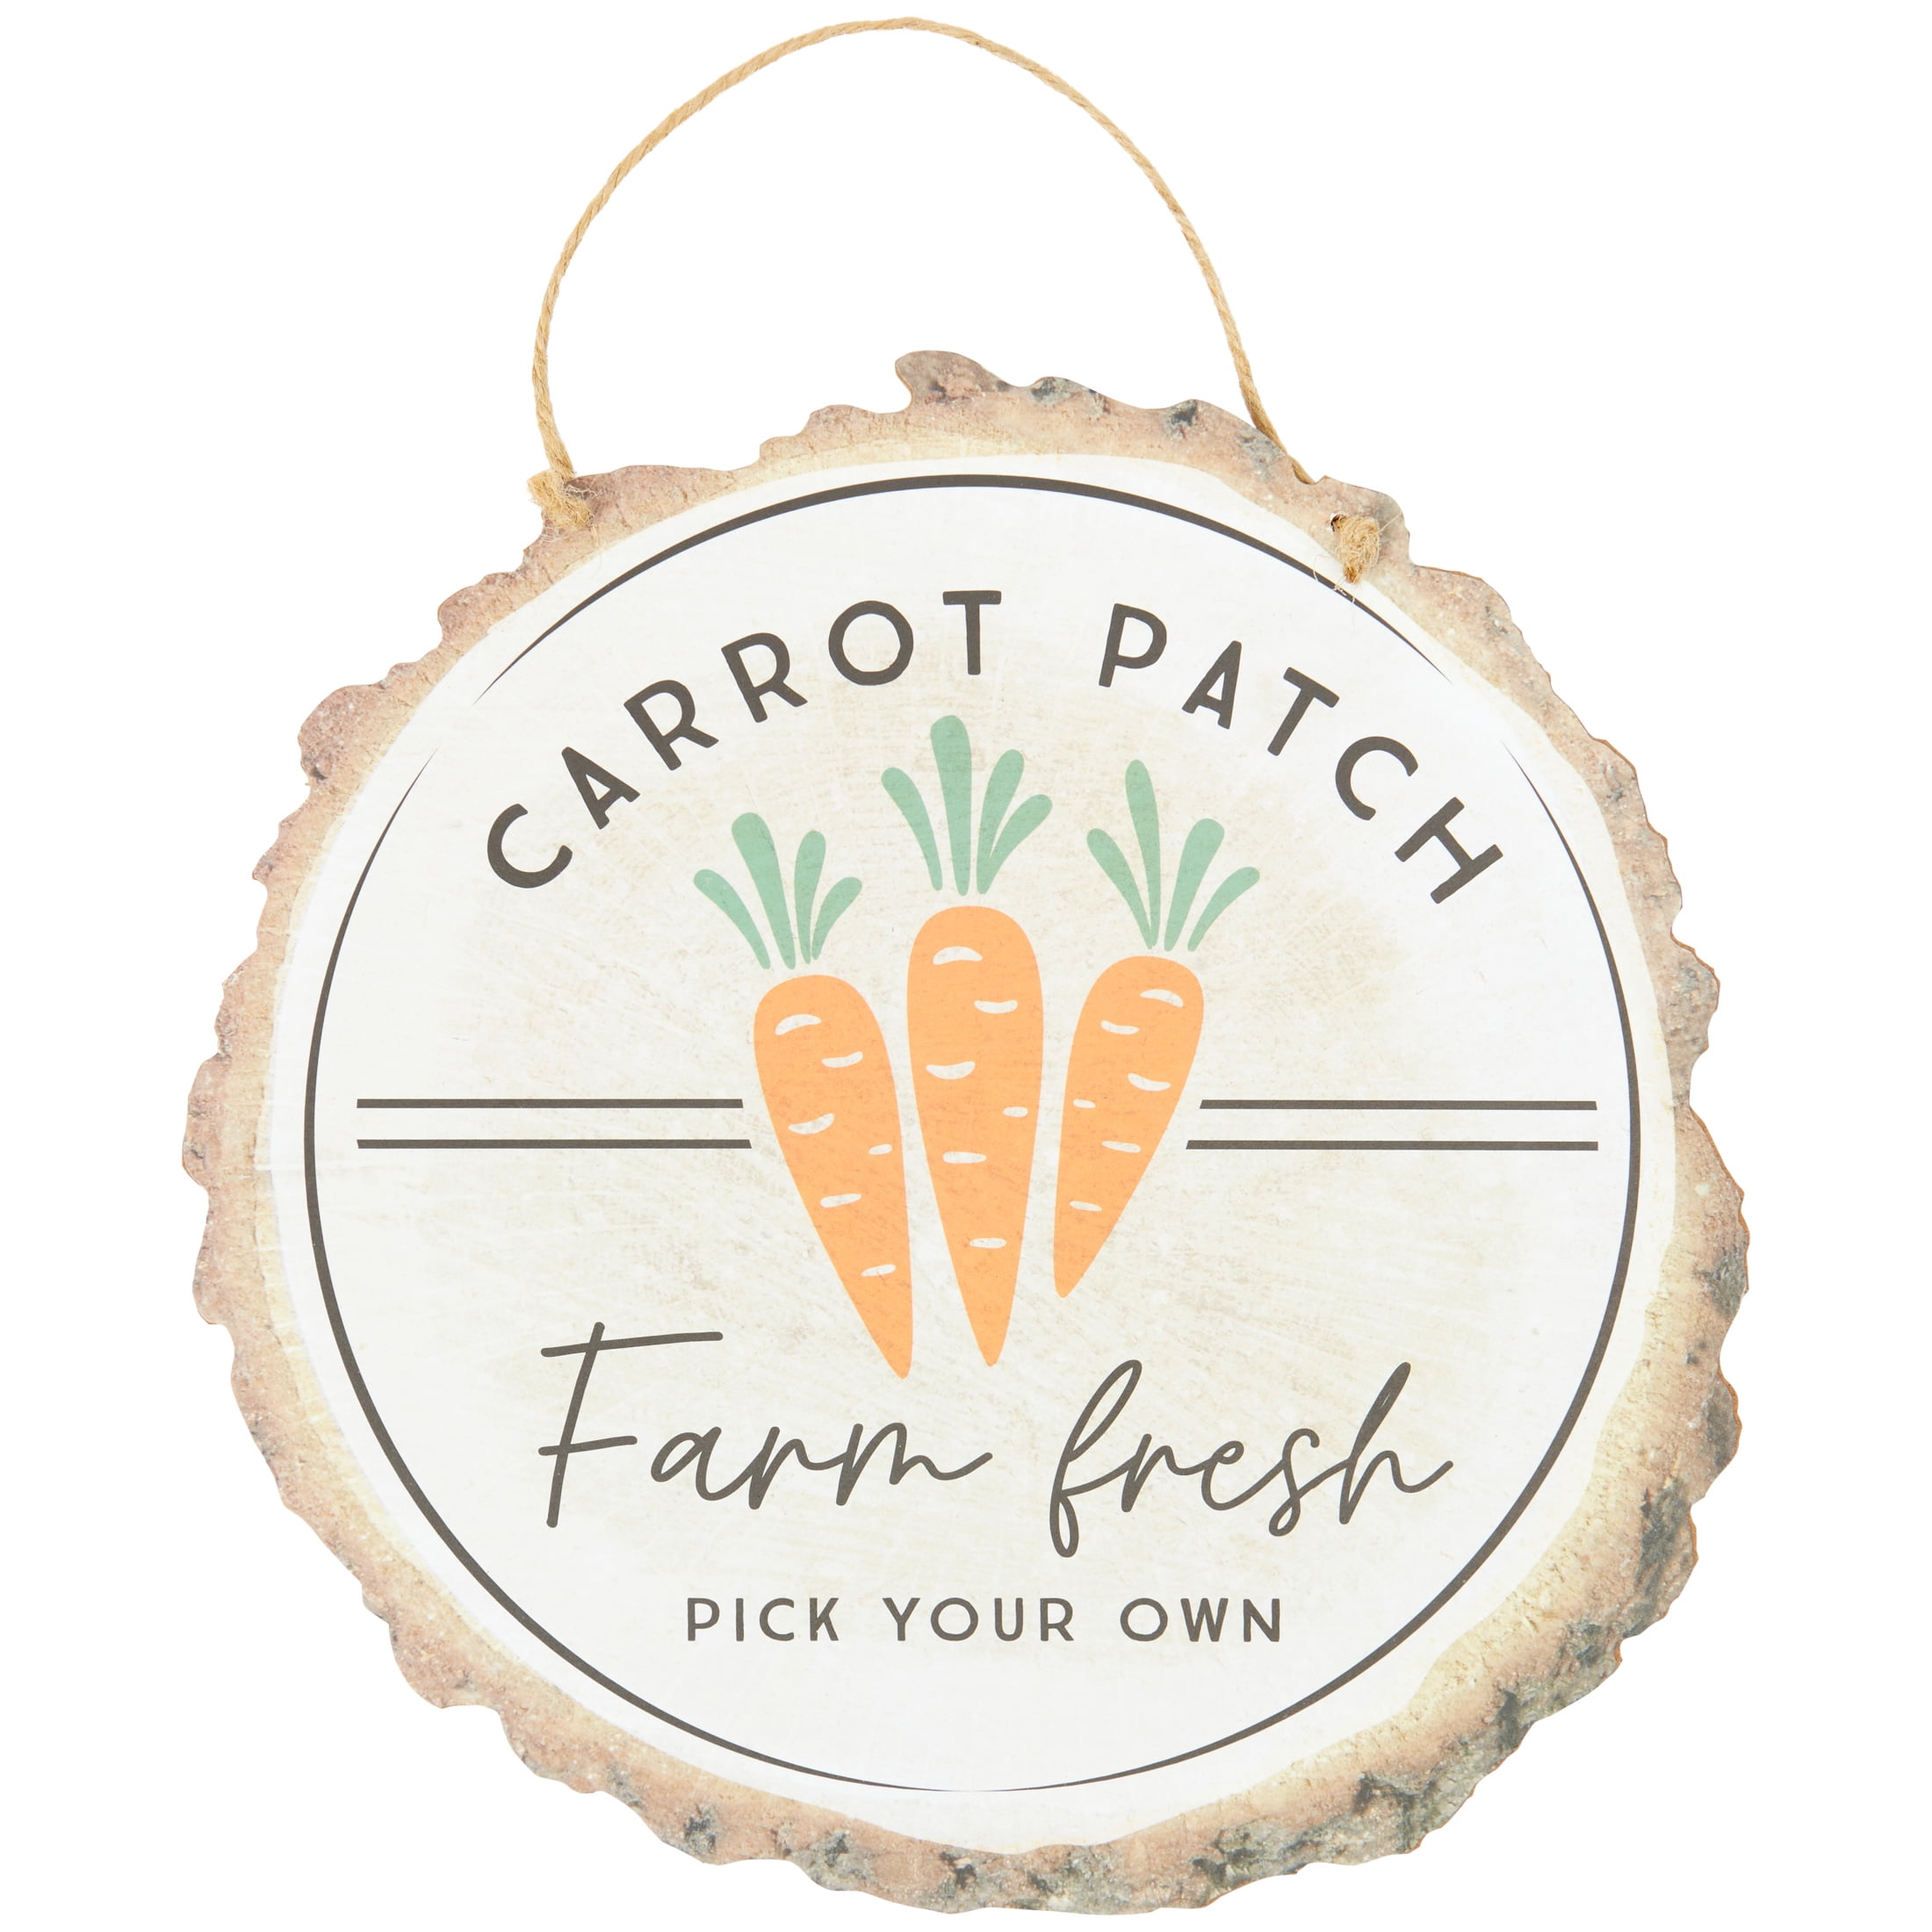 WAY TO CELEBRATE! Way To Celebrate Easter Carrot Patch Wood Slice Art